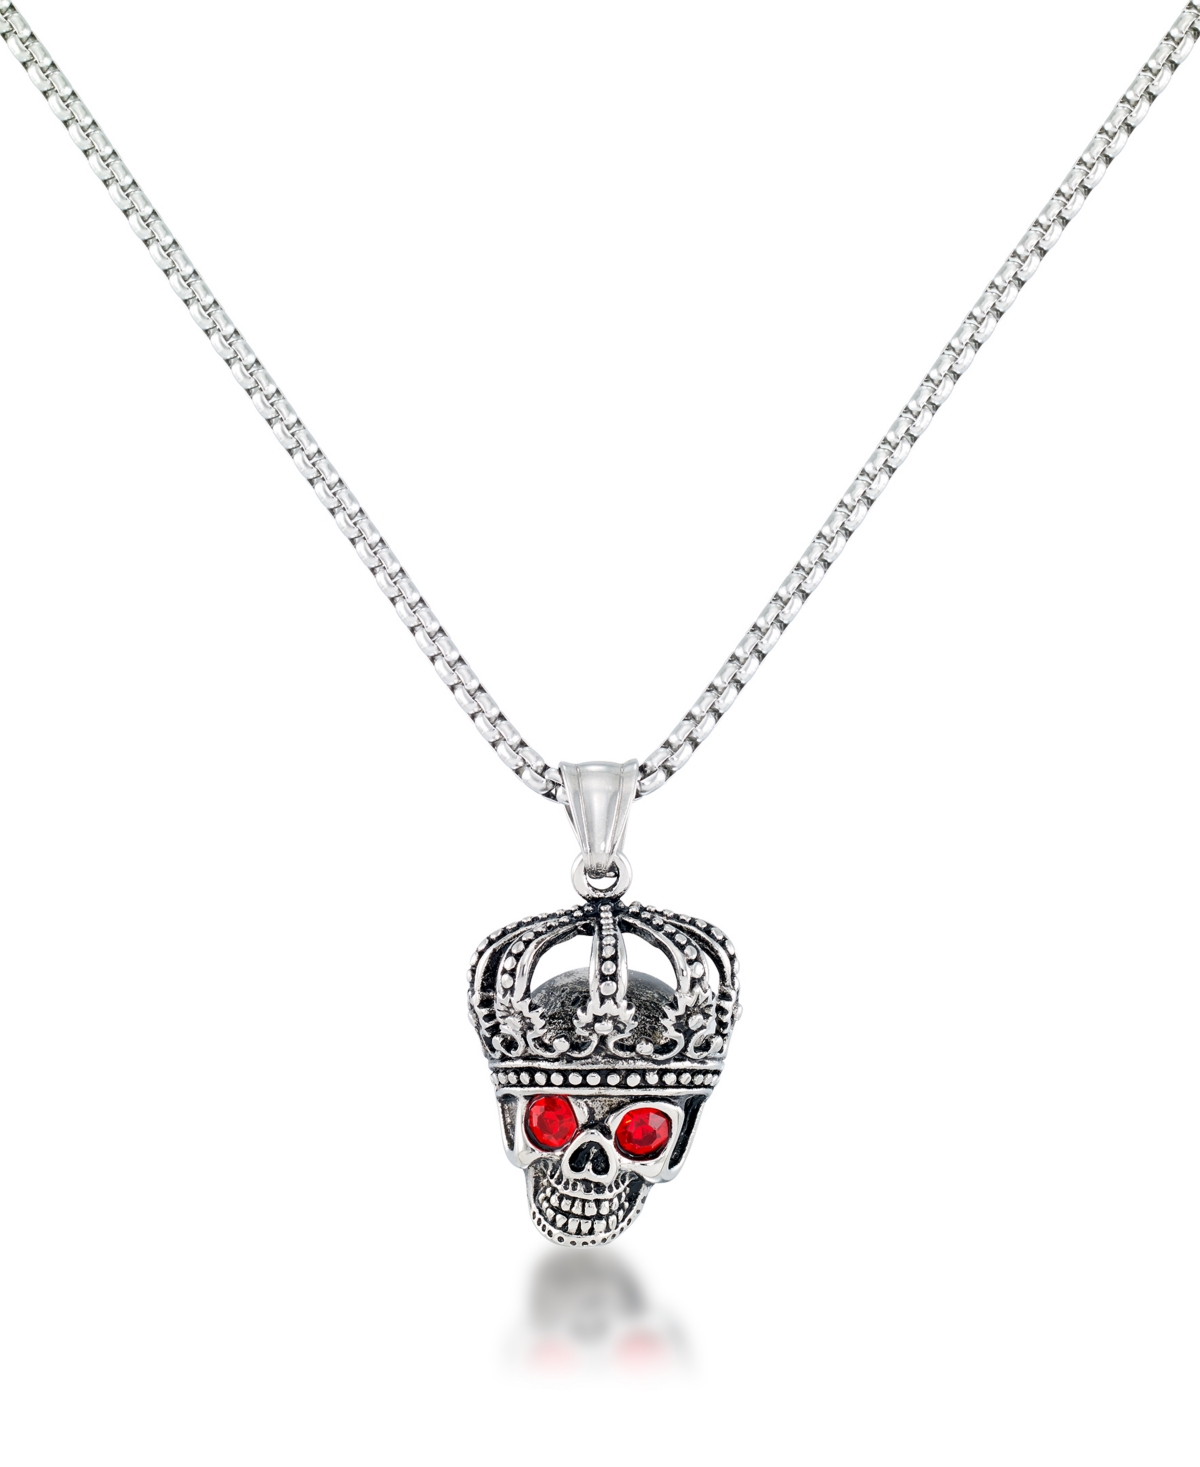 Men's Red Cubic Zirconia King Skull 24" Pendant Necklace in Stainless Steel - Stainless Steel